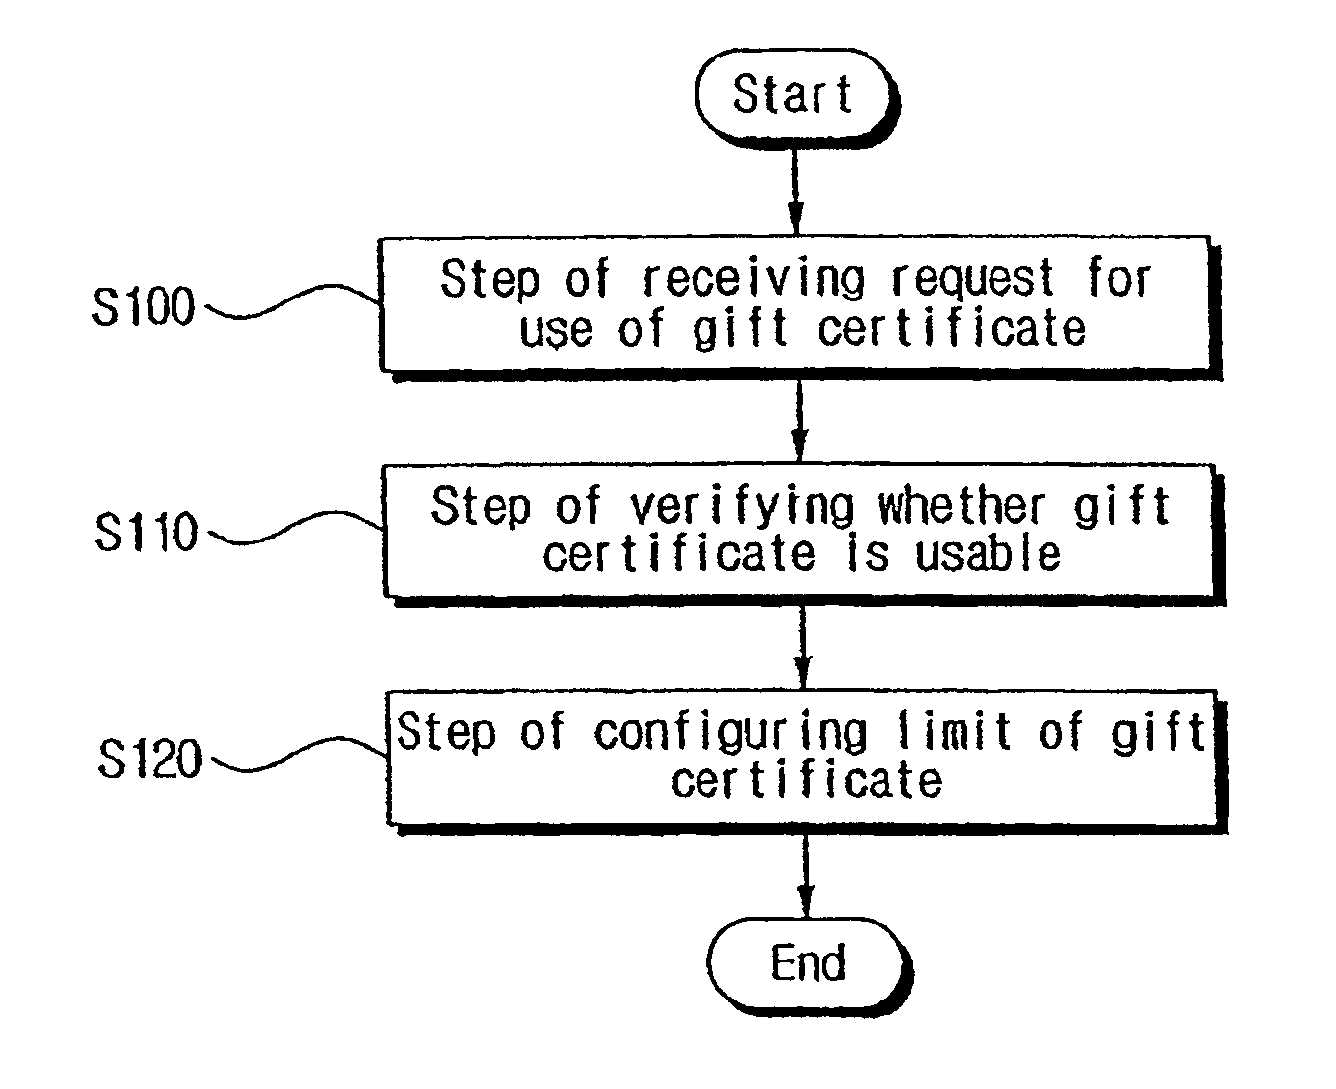 System and method for operating a gift certificate on the basis of credit card transactions